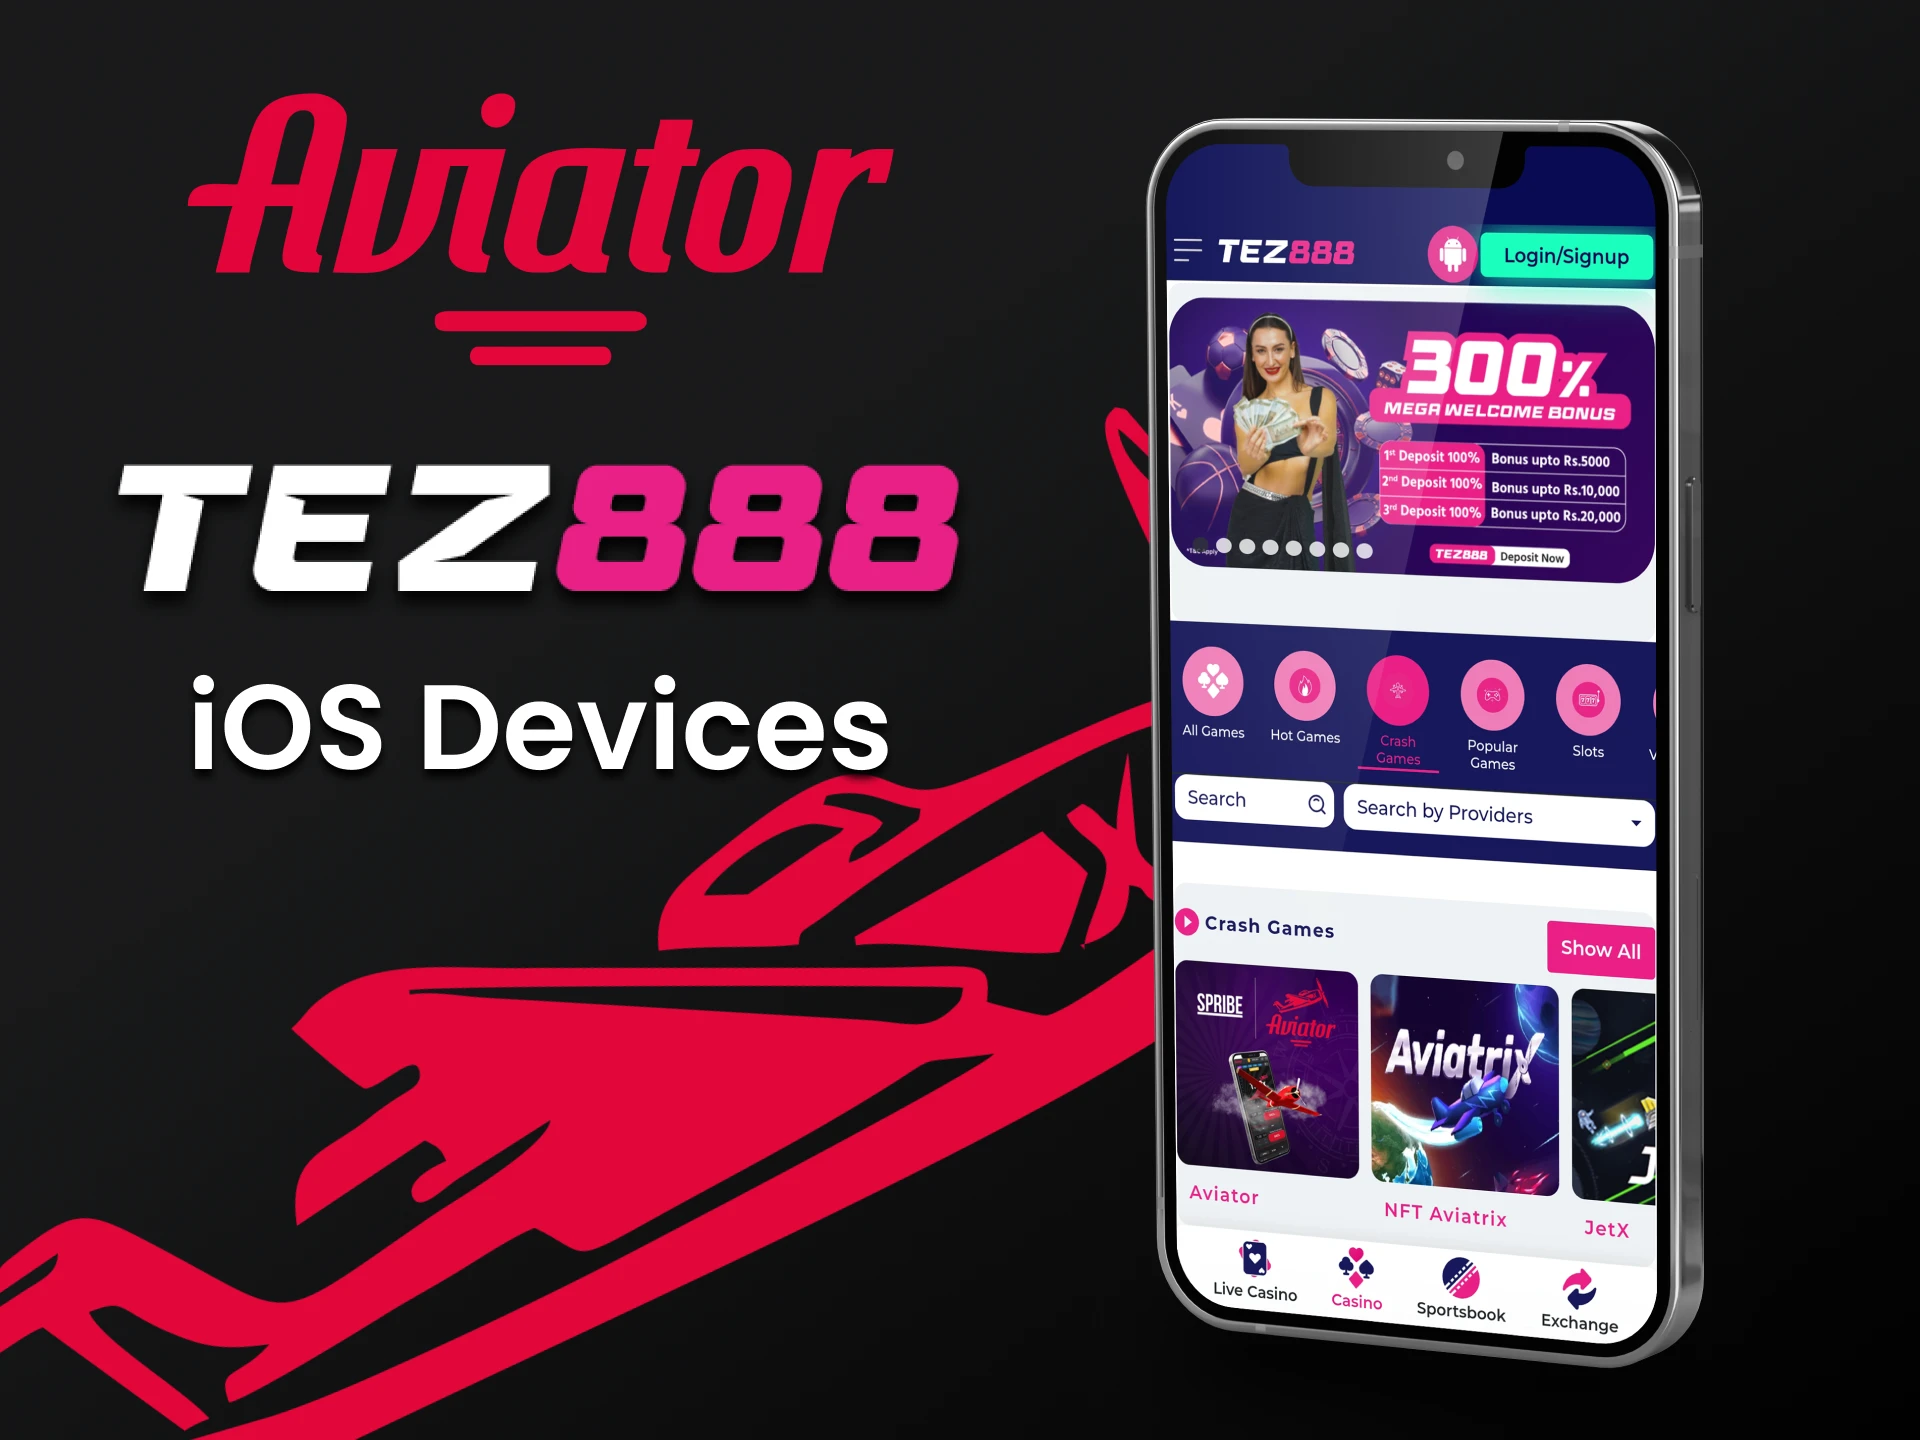 Install the Tez888 application for iOS devices.